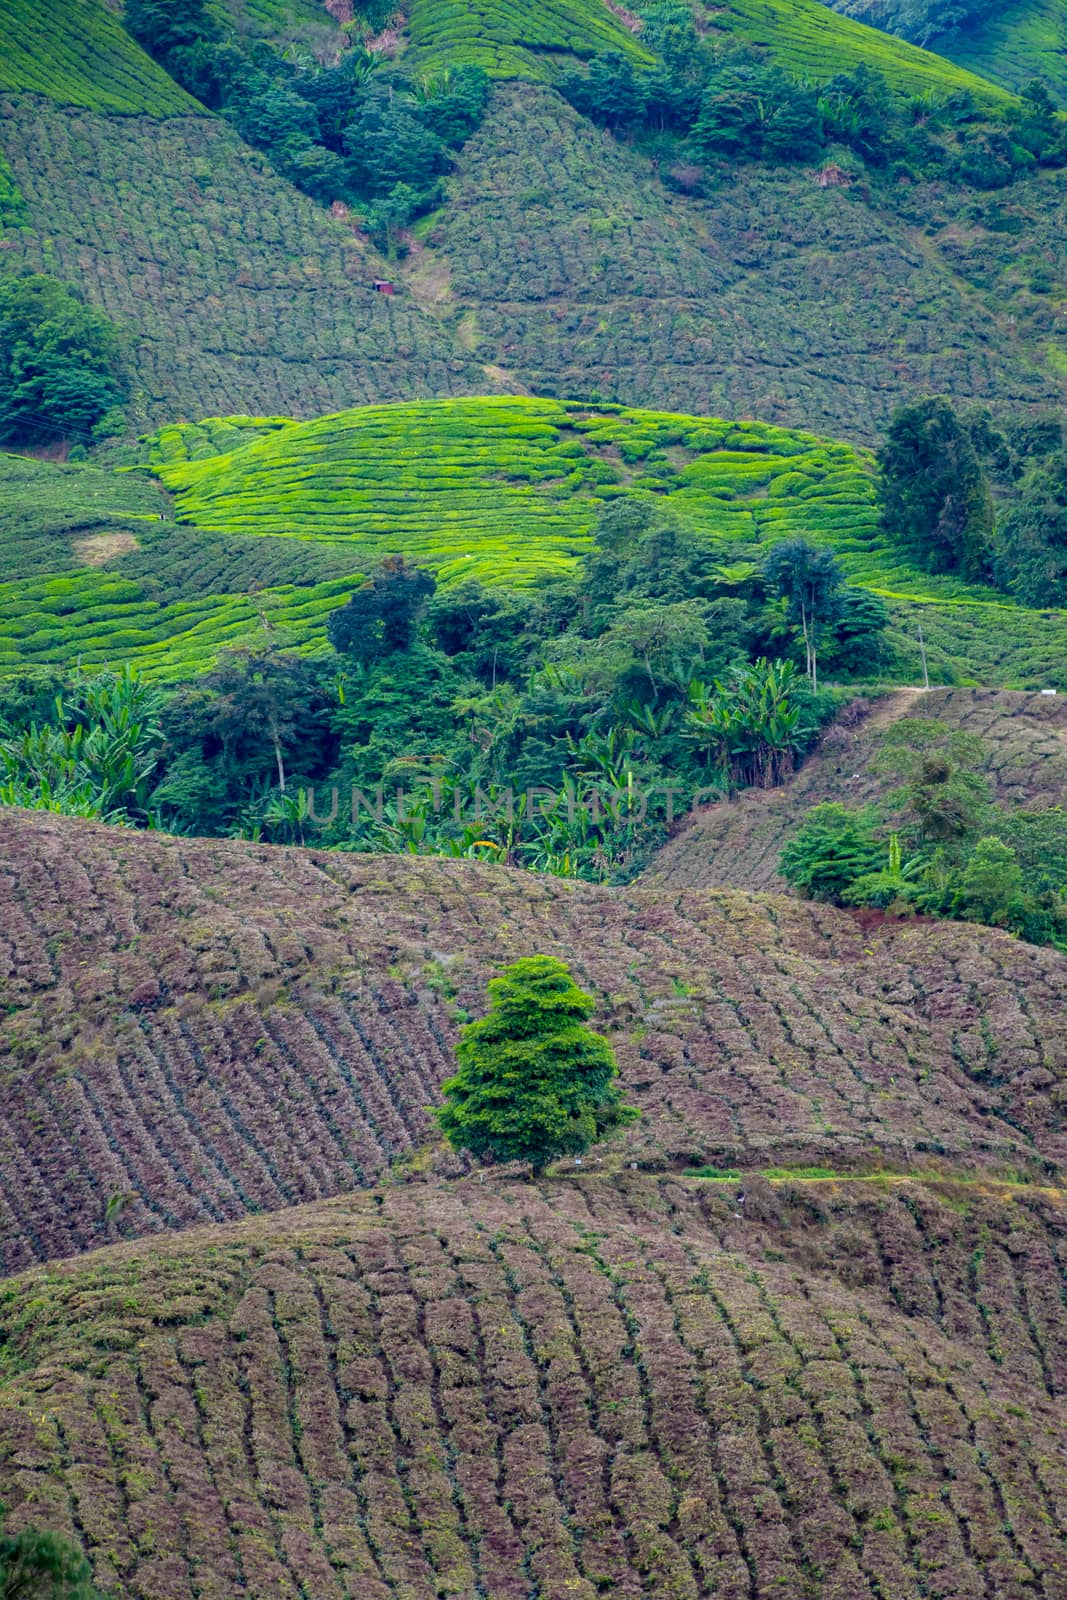 Tea plantation rows of Camellia sinensis reaching from valley bottom to mountain top by MXW_Stock